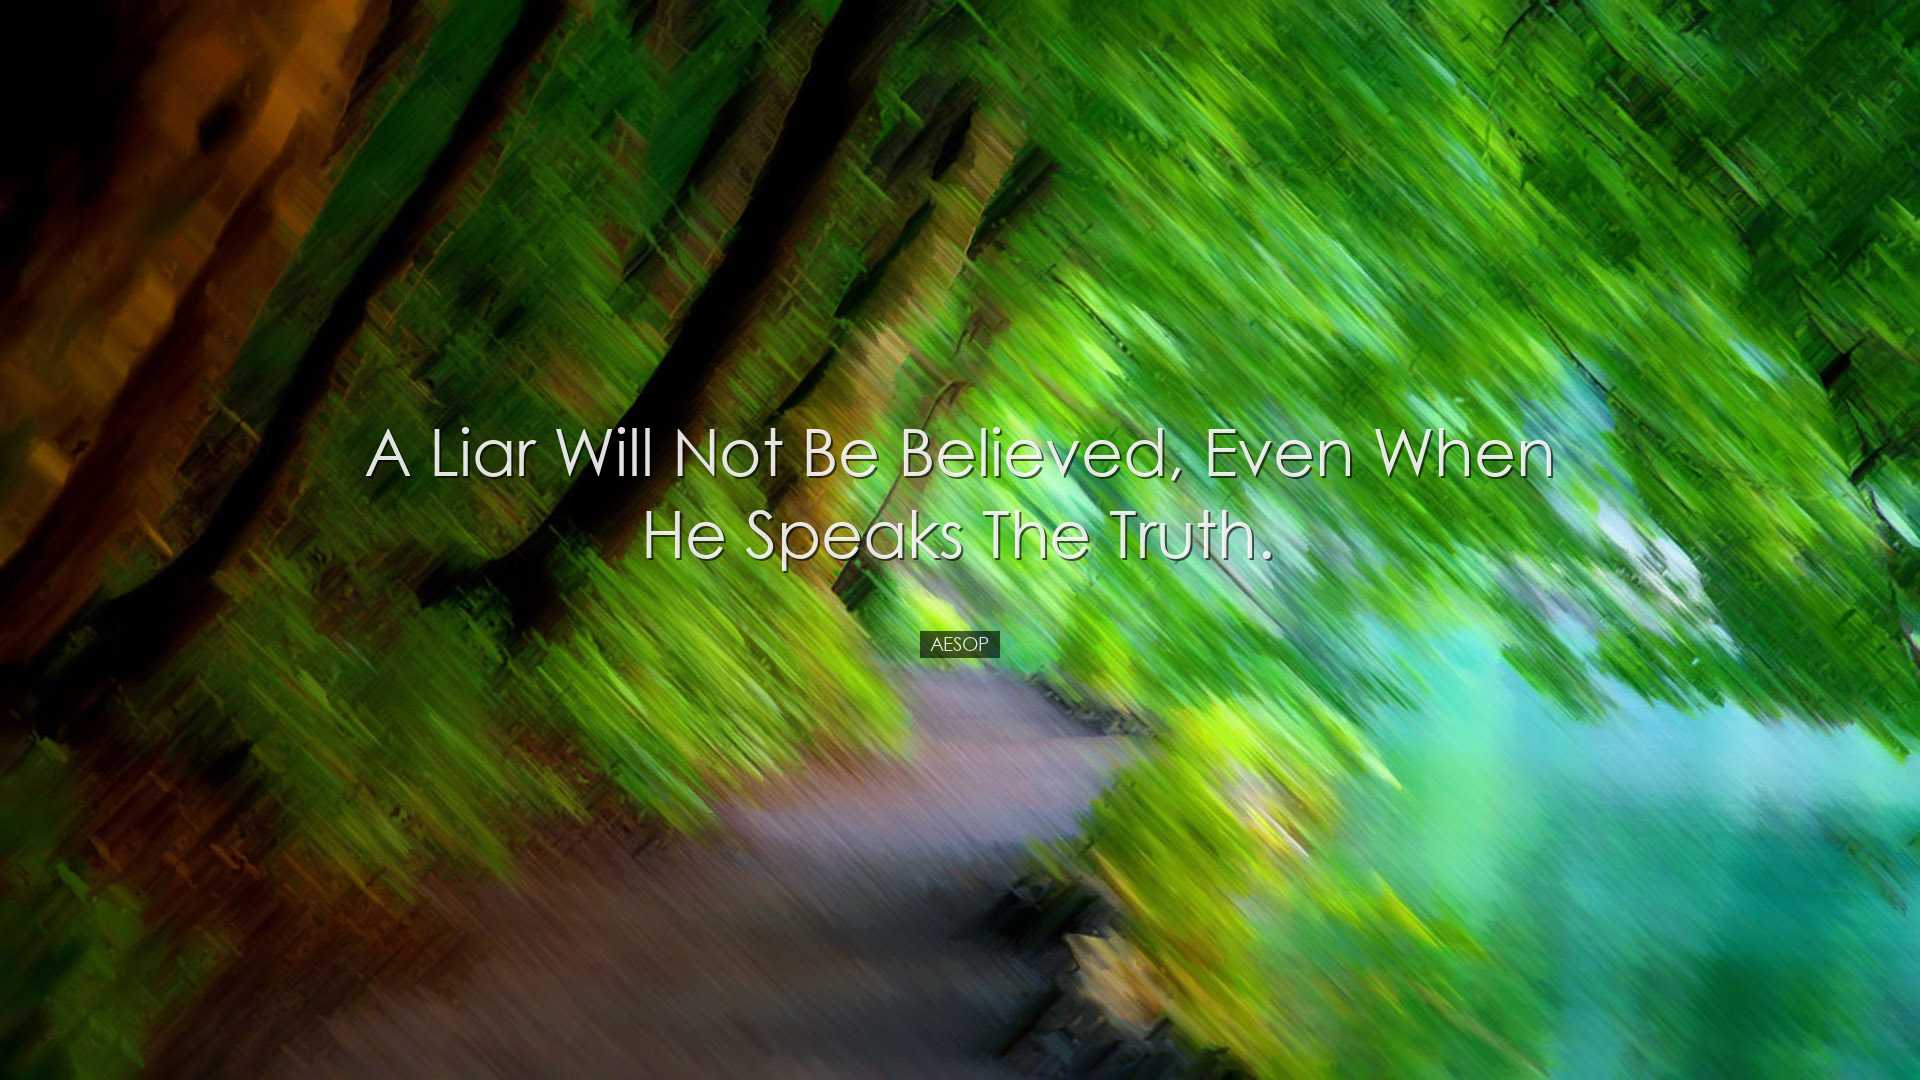 A liar will not be believed, even when he speaks the truth. - Aeso